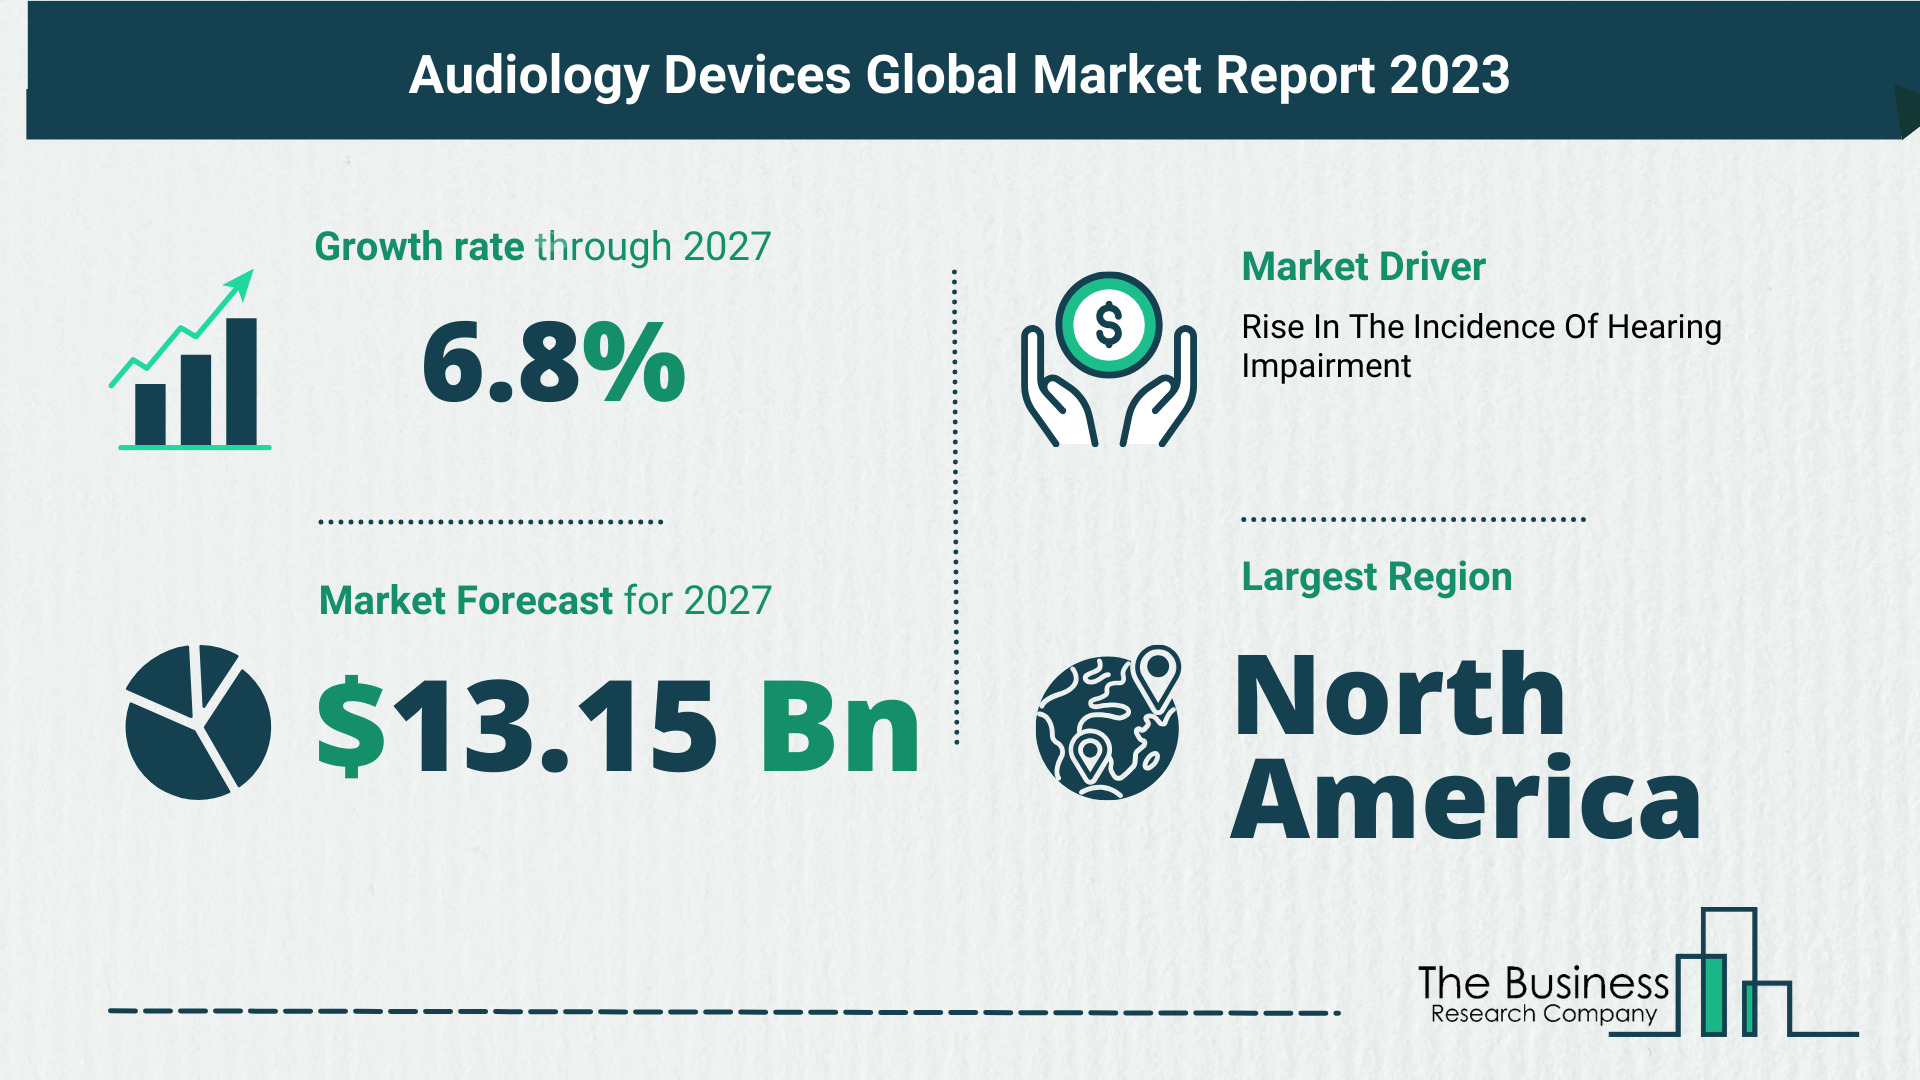 What’s The Growth Forecast For Audiology Devices Market Through 2023-2032?